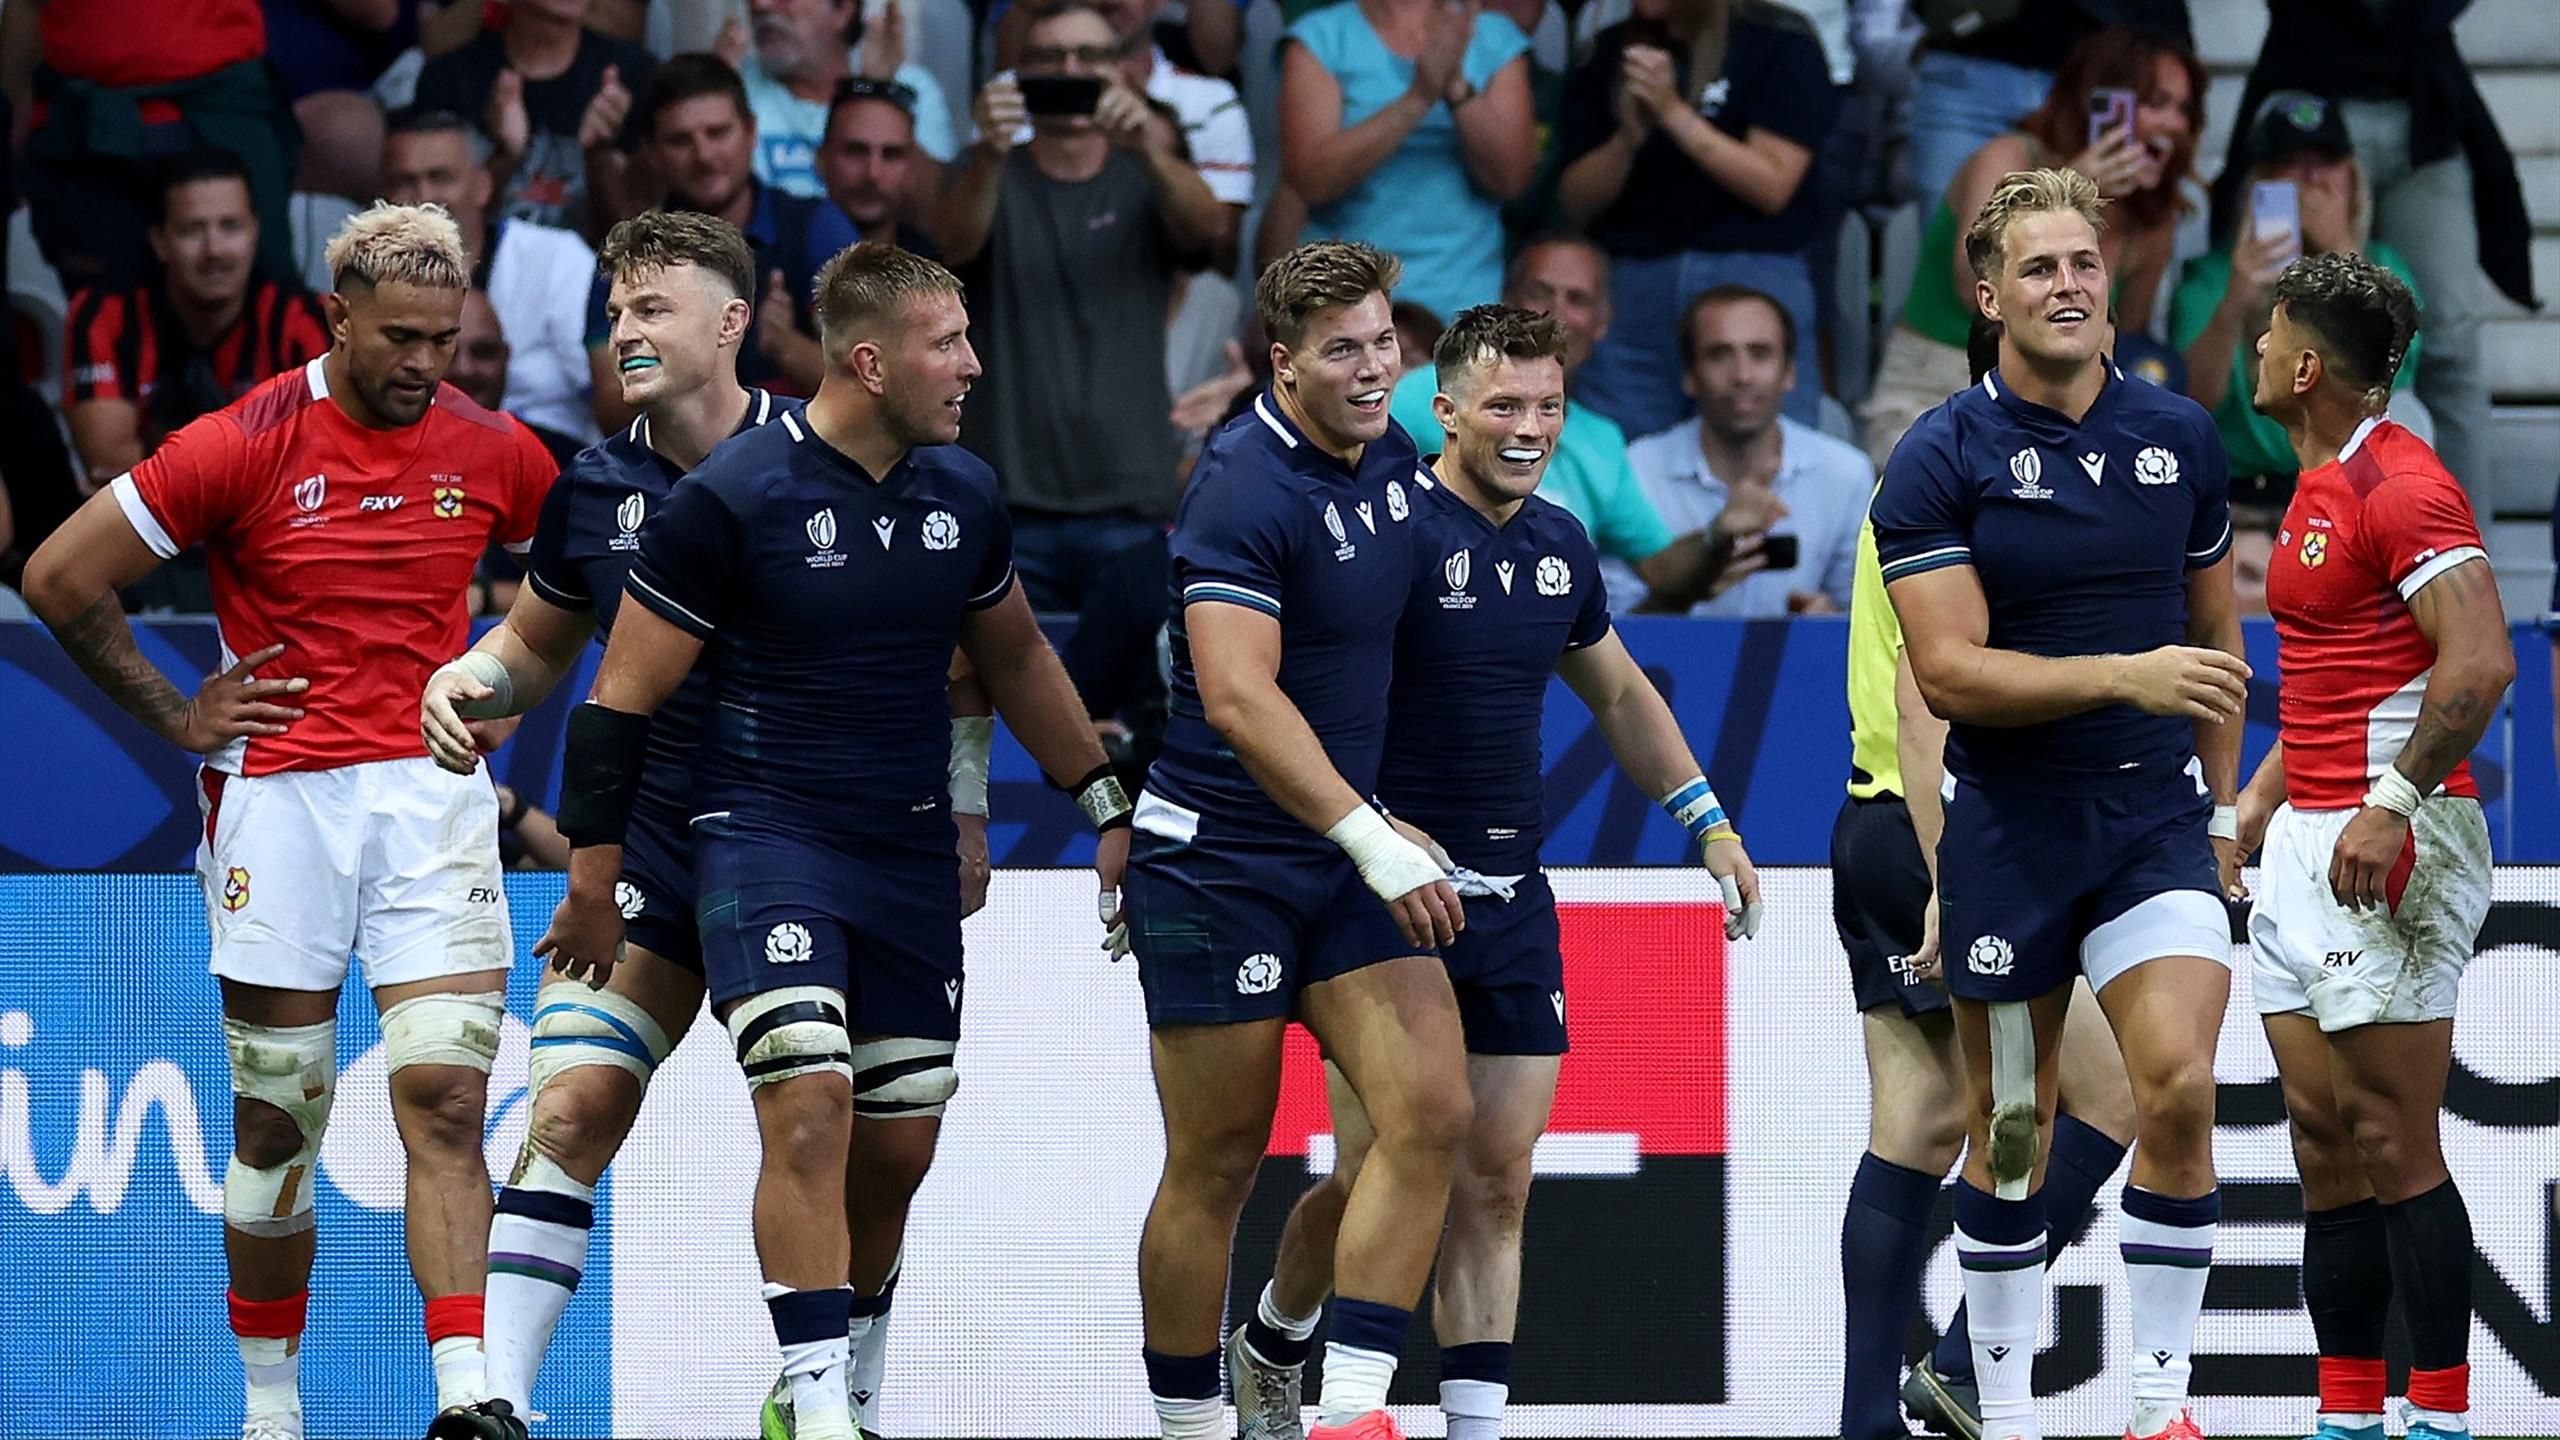 Scotland 45-17 Tonga Gregor Townsends side claim bonus point win to keep Rugby World Cup quarter-final hopes alive